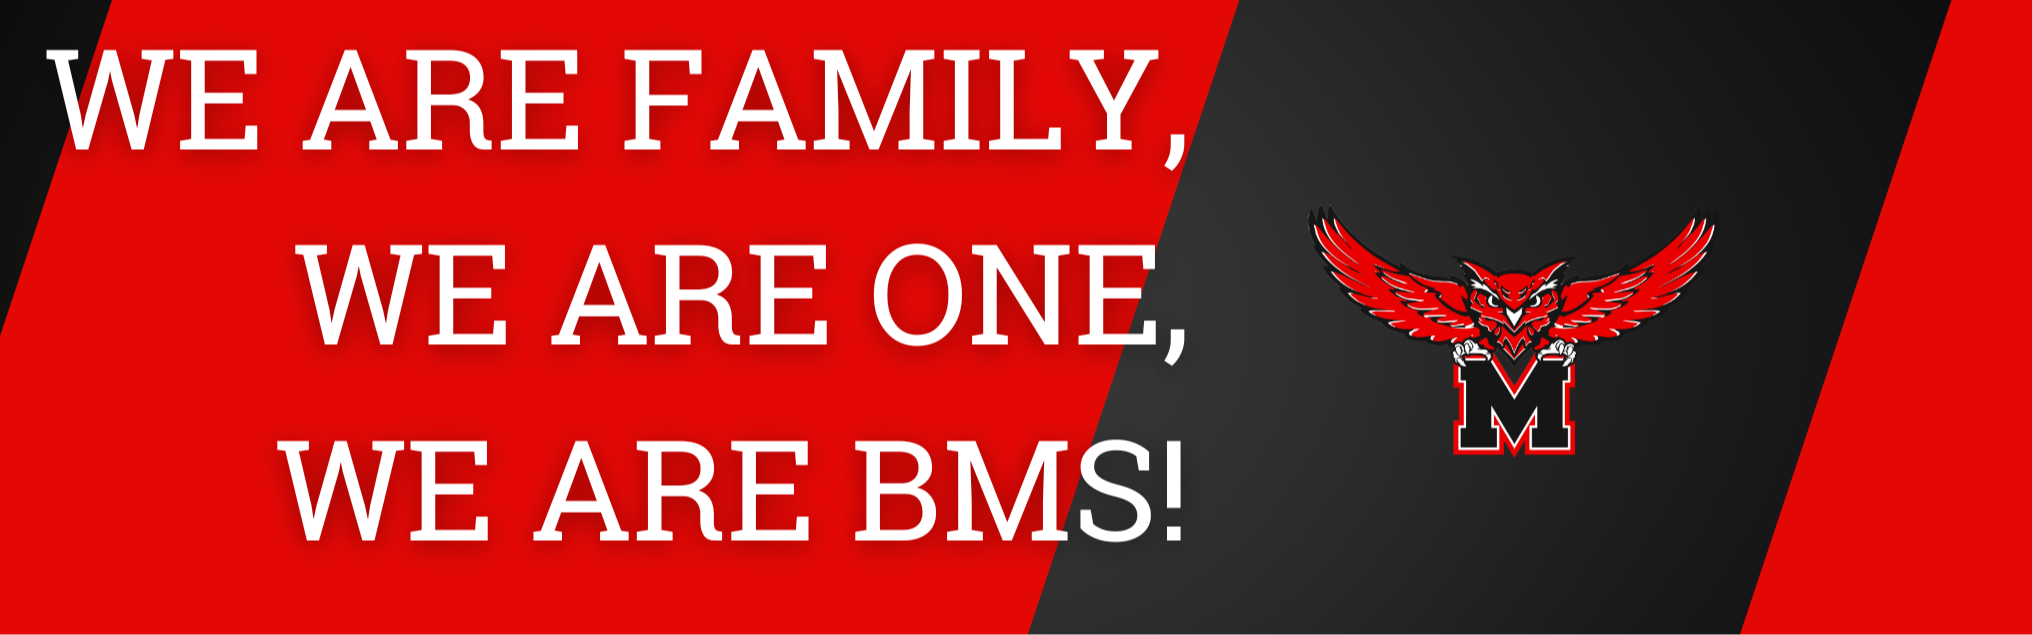 we are bms